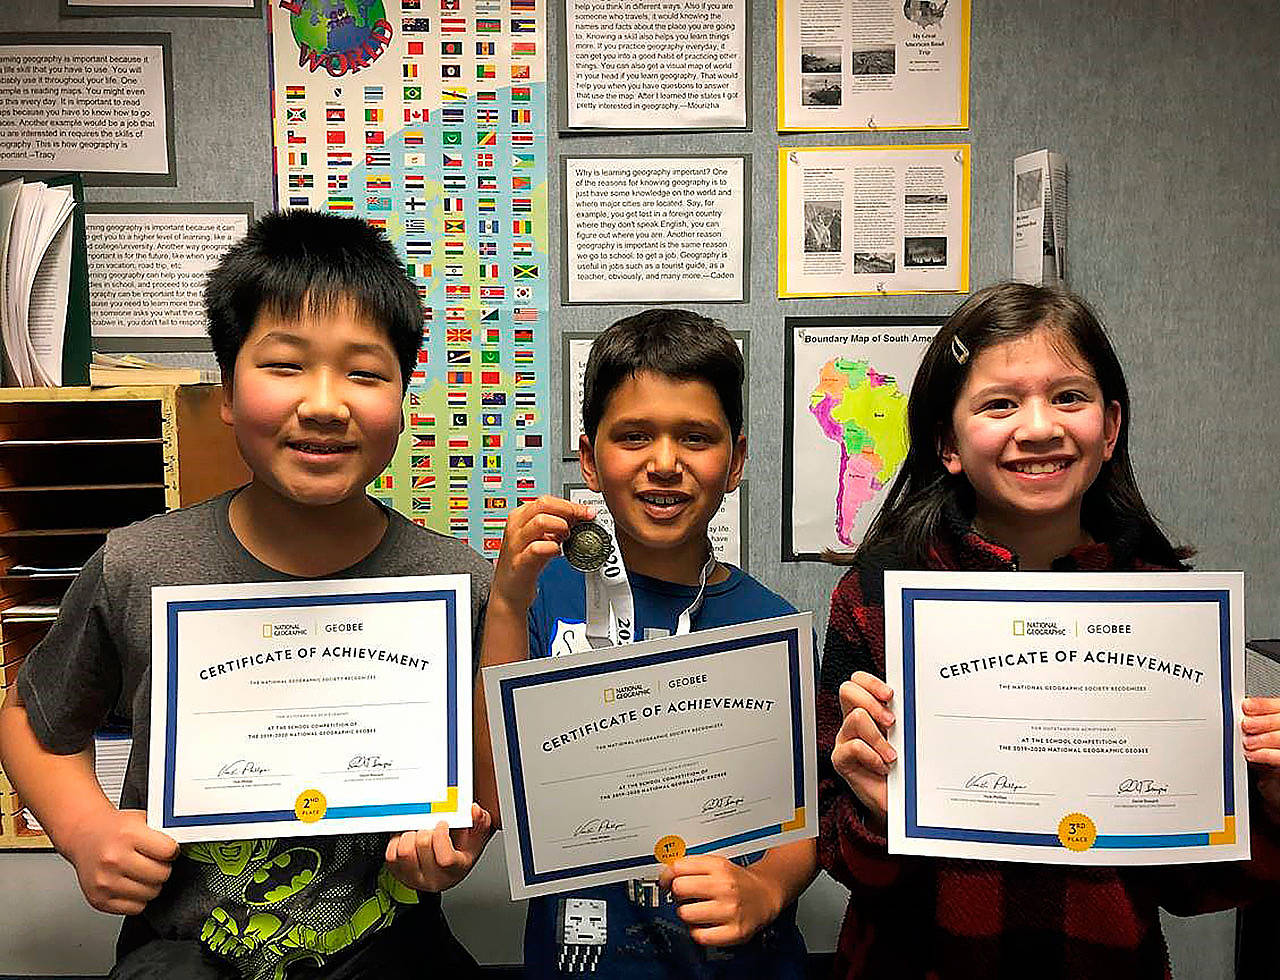 Andy (from left) (Ji-Hoon) Park, Sorin Bulgannawar and Maddy Swanson show their joy over their certificates of achievement.